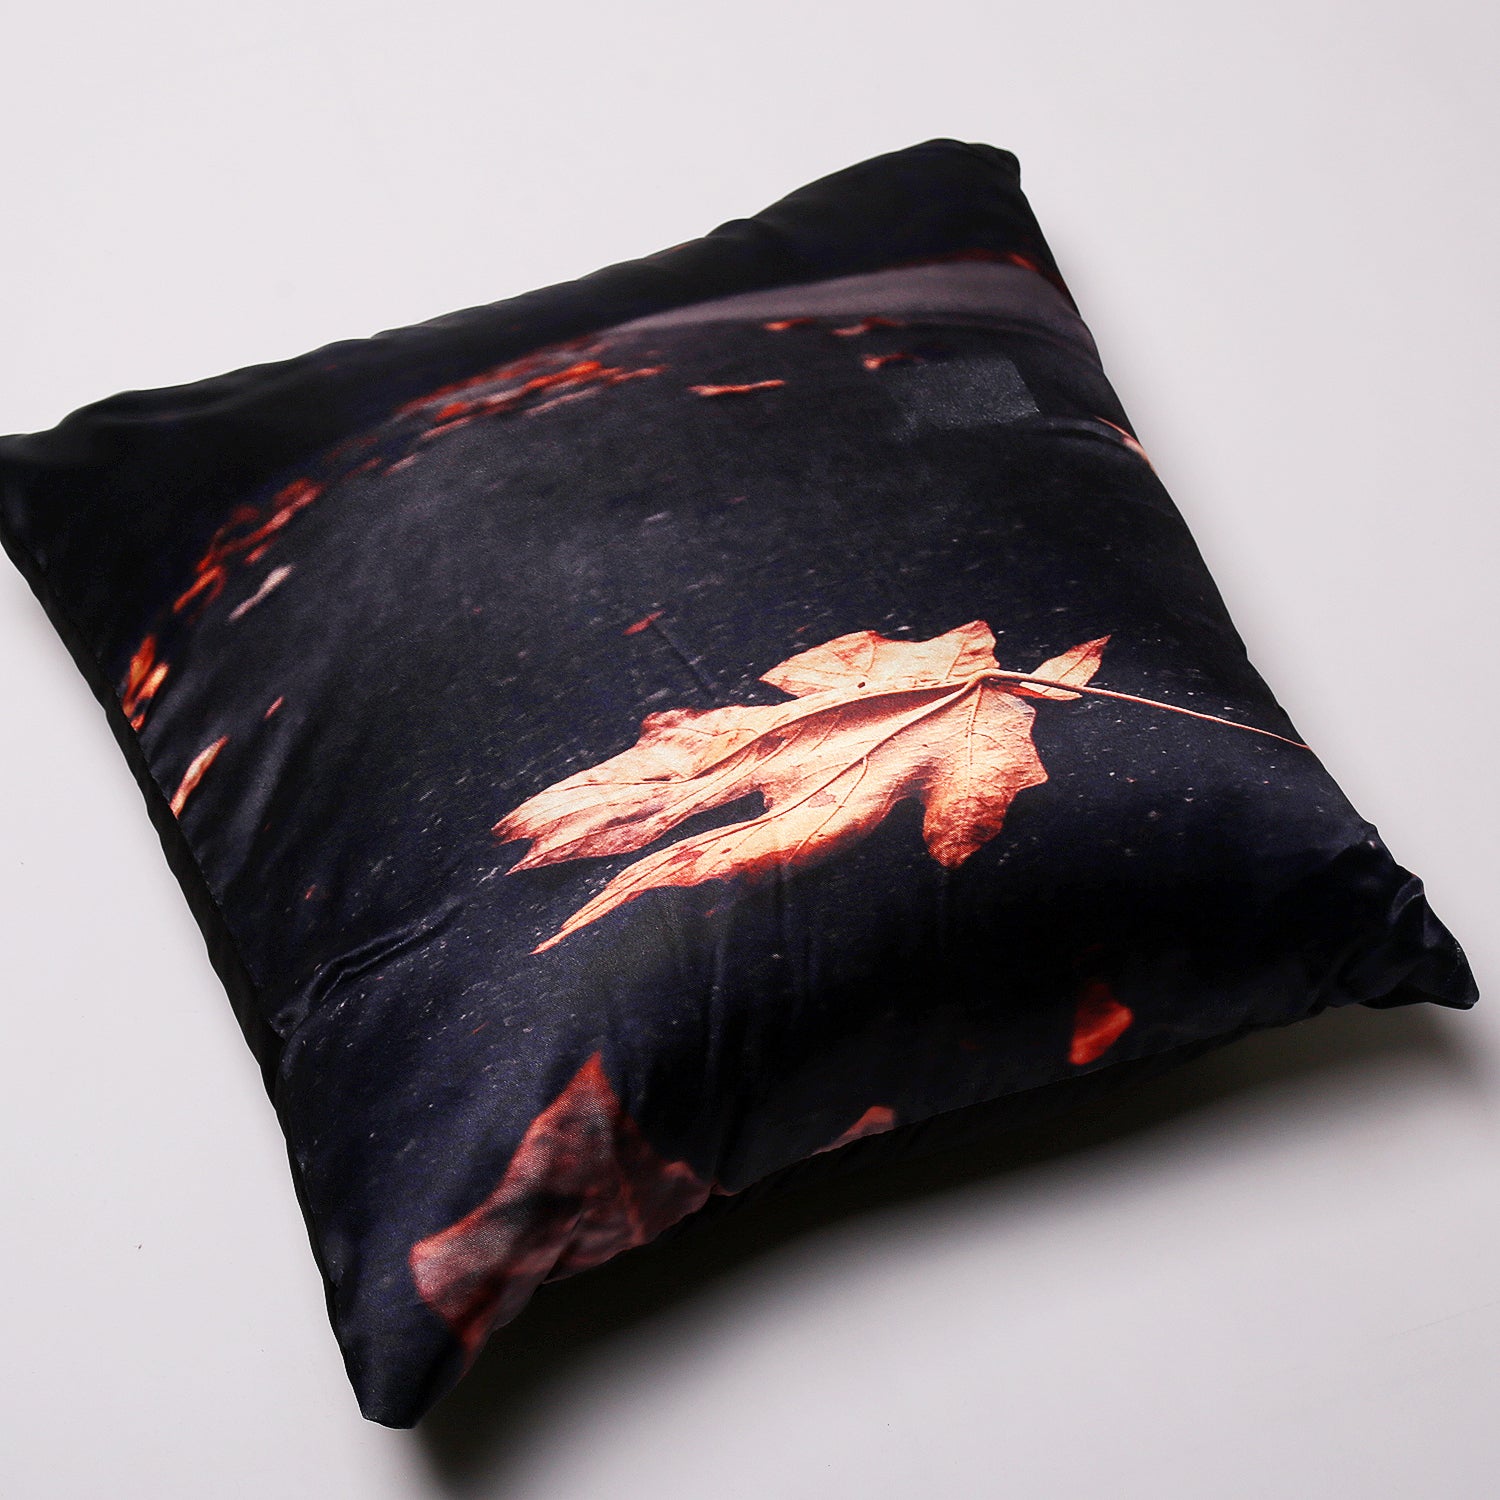 NEW BLACK WITH LEAF 3D DIGITAL PRINTED CUSHION PILLOW